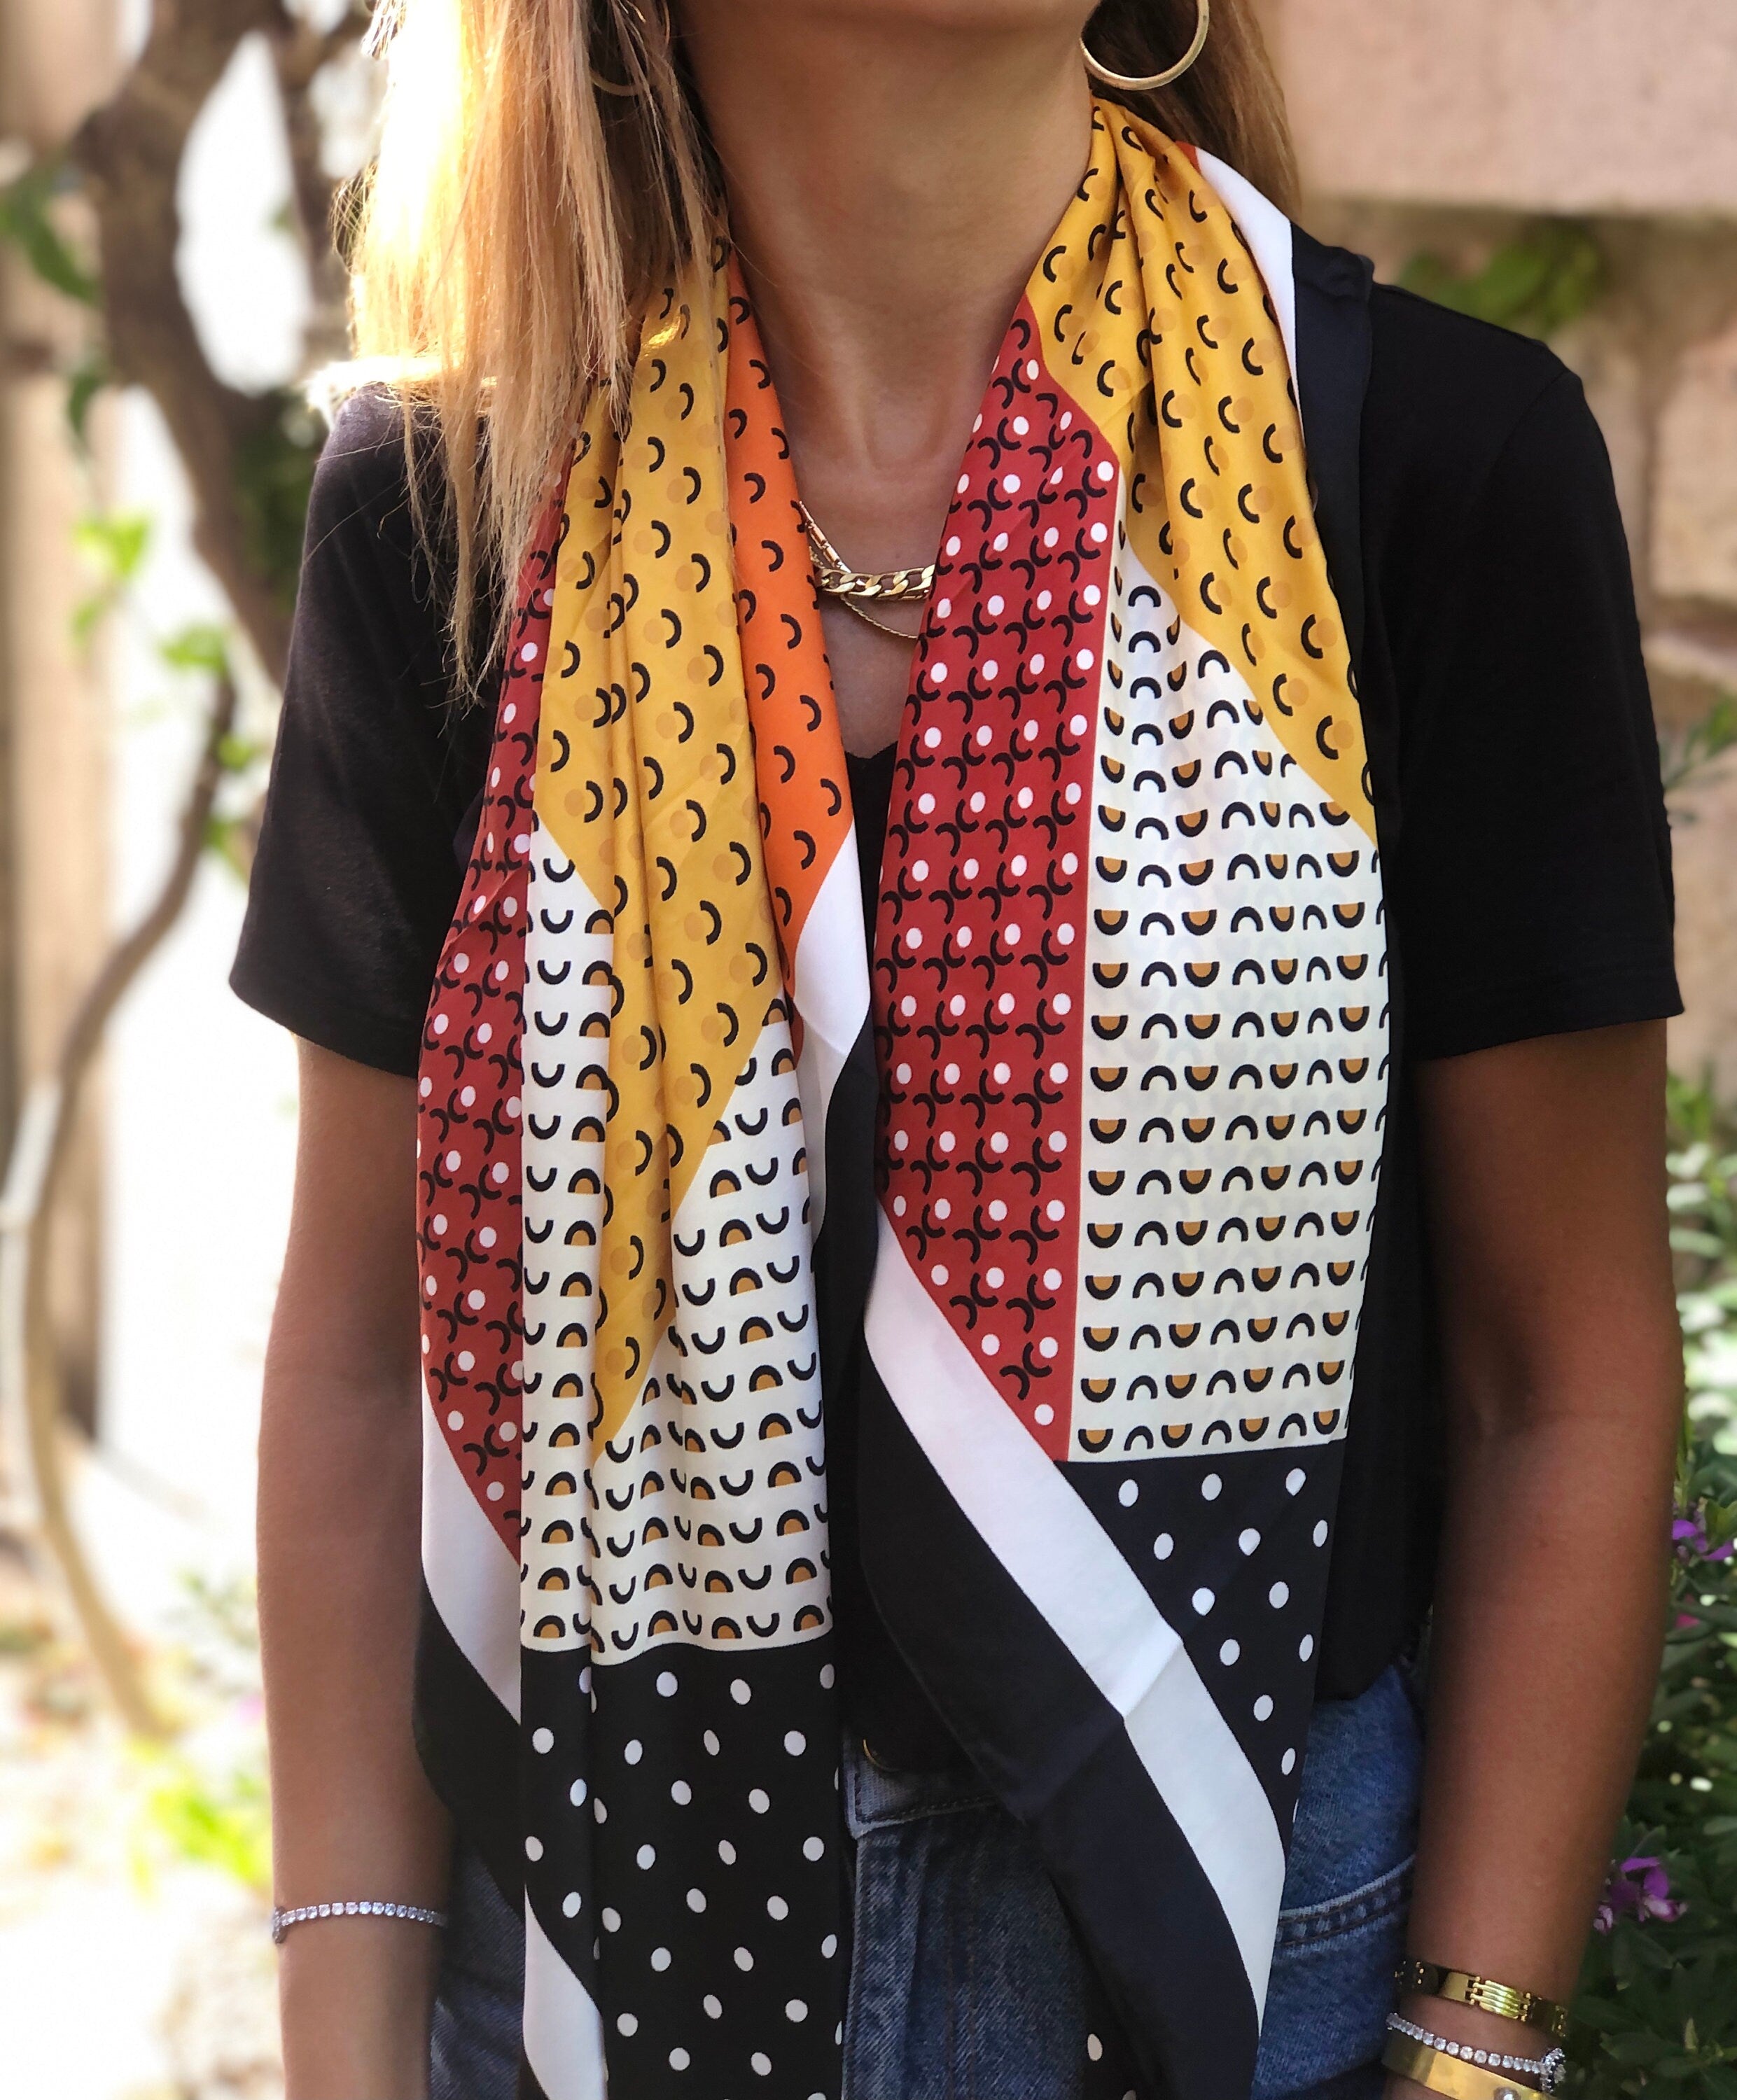 Show off your unique style with this colorful printed scarf. Made from lightweight and strikingly textured satin, it is perfect for summer days.